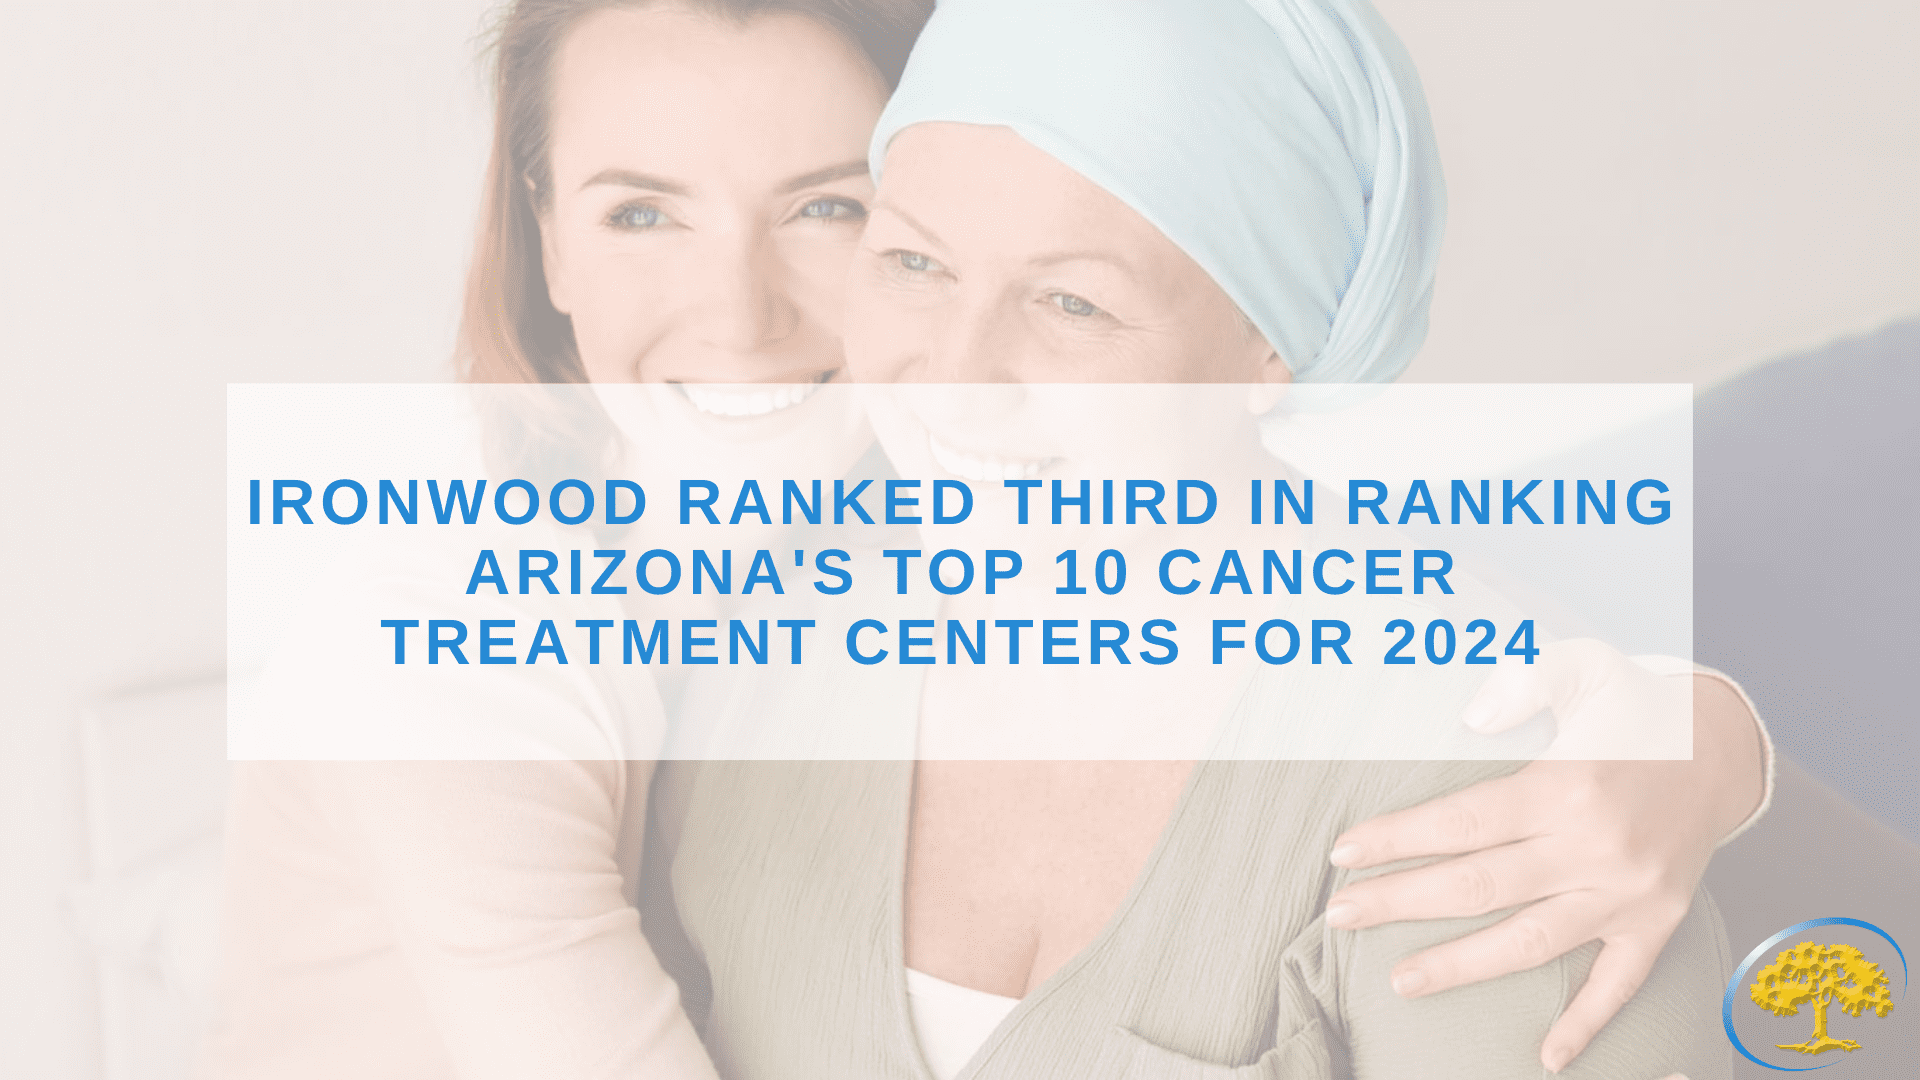 Ironwood Ranked Third in Ranking Arizona's Top 10 Cancer Treatment Centers for 2024